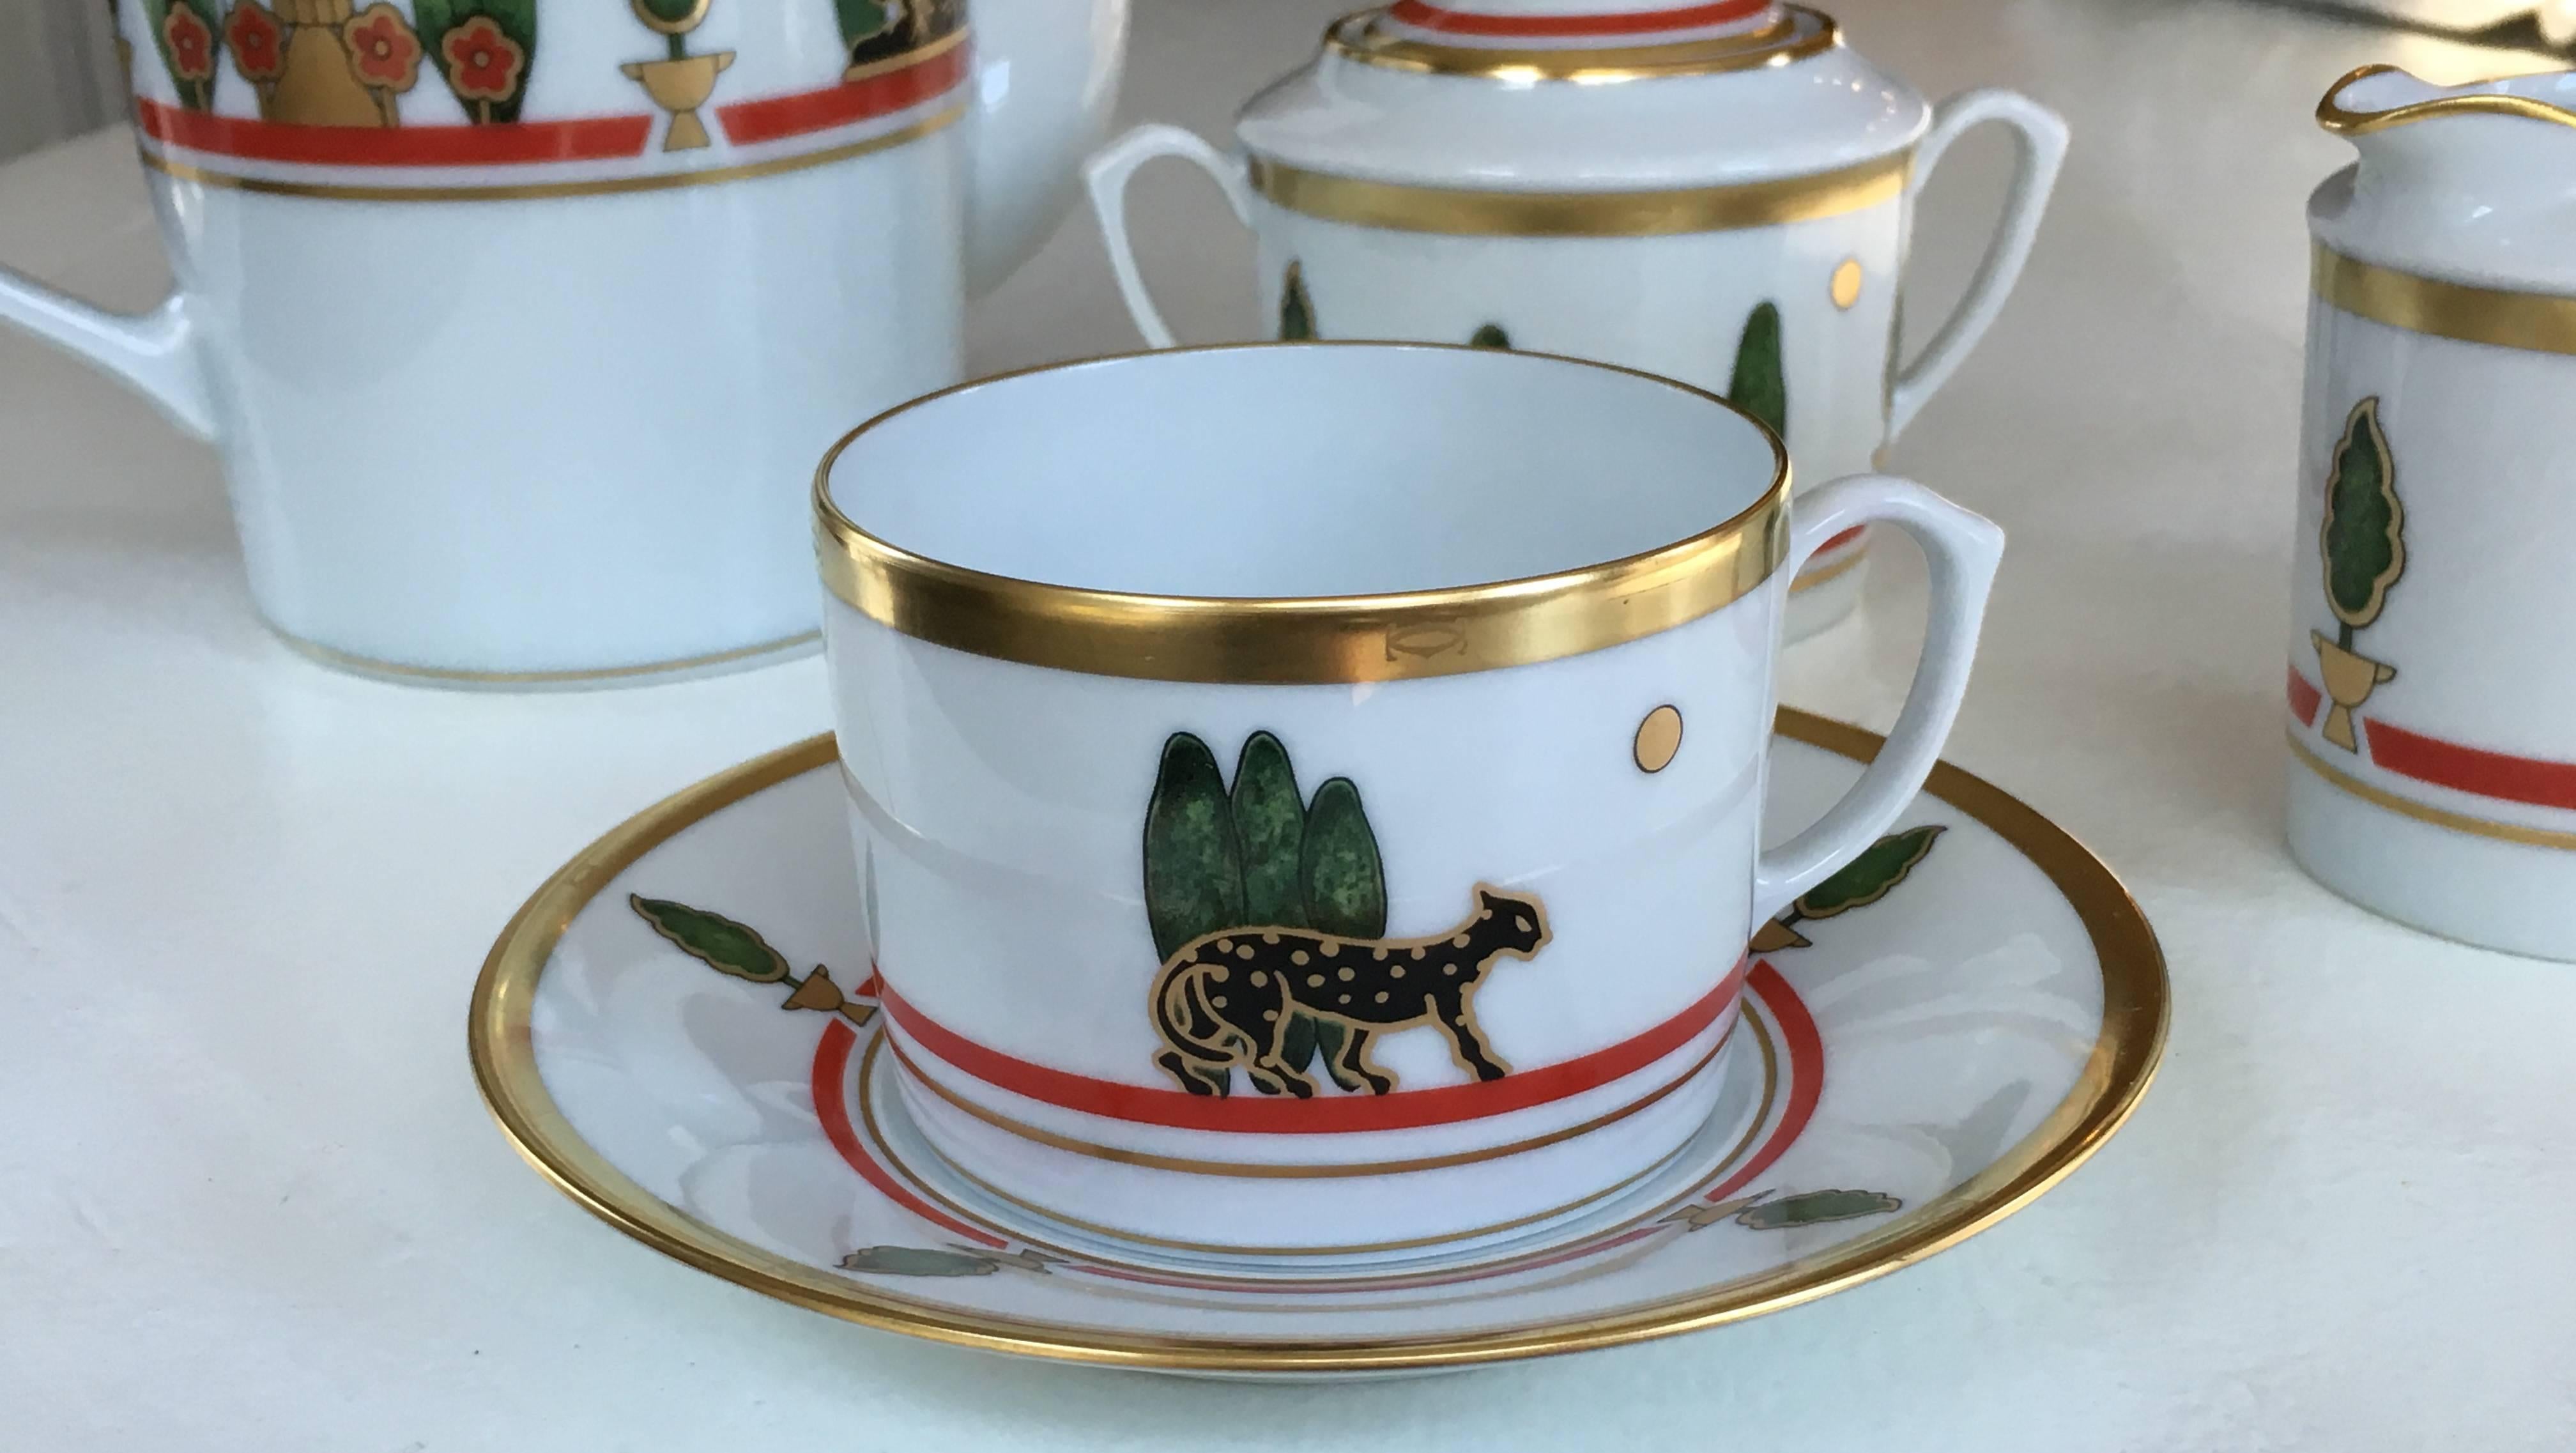 Featuring gold rim and detail, the classic Cartier black panther, red inner band and green bushes; in the 1980s Cartier and Limoges France collaborated on a line of fine porcelain. Price is for coffee pot and lid, sugar bowl and lid, creamer and 12